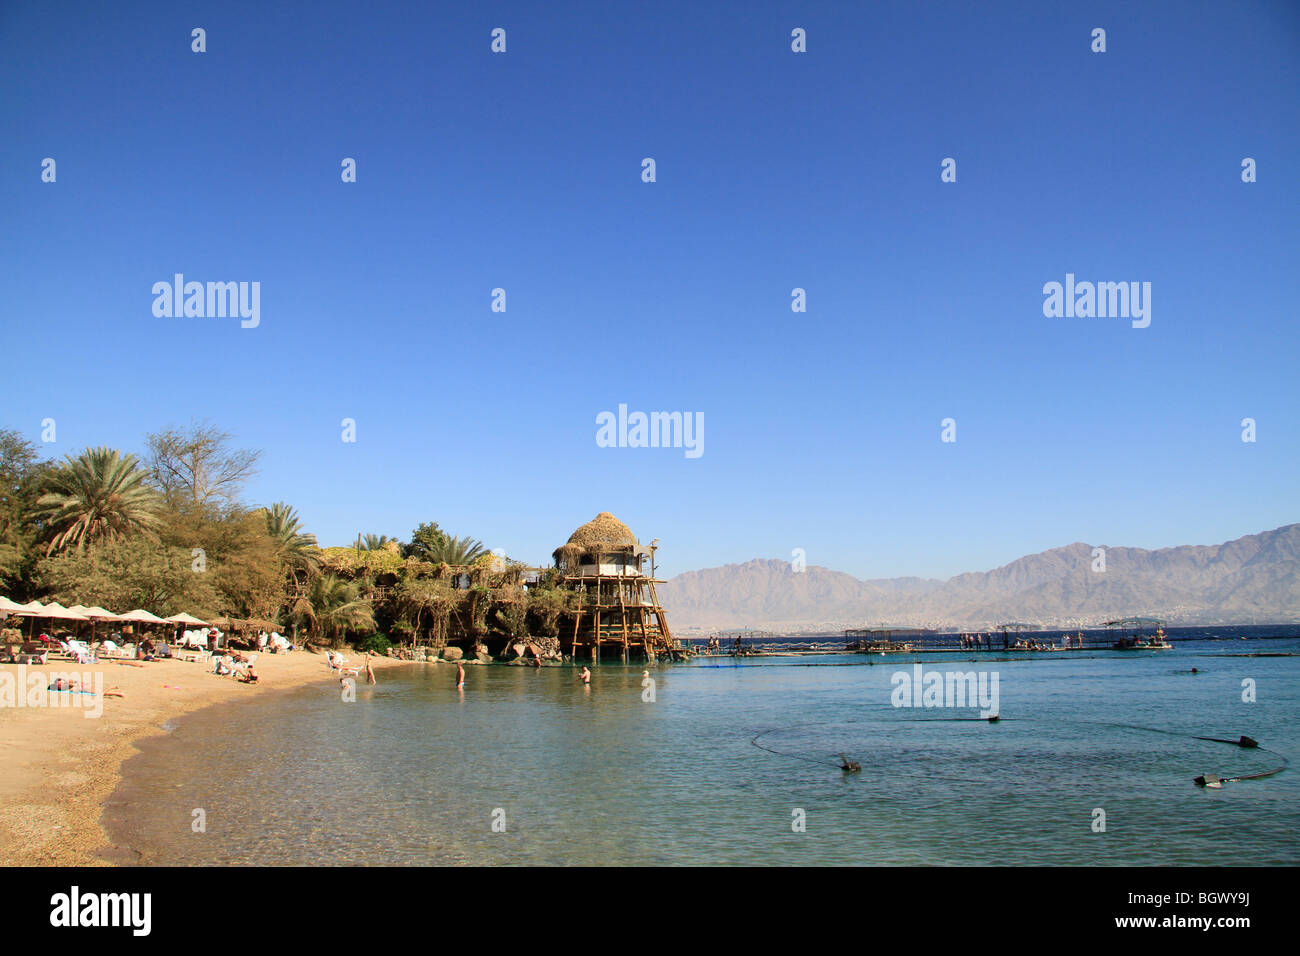 Israel, the Dolphin Reef beach in Eilat Stock Photo